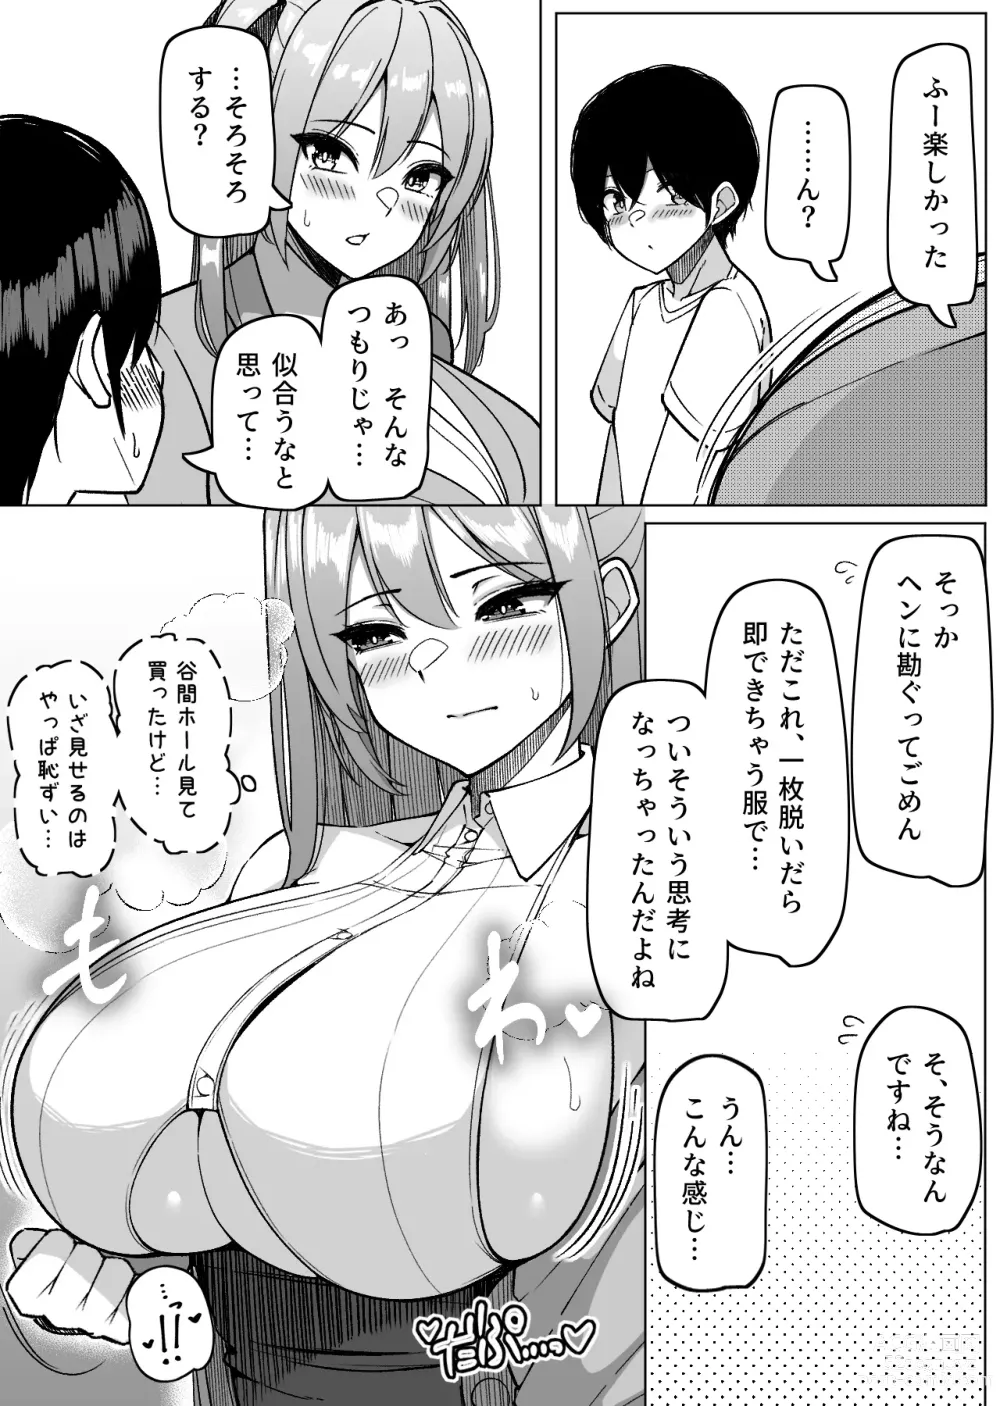 Page 22 of doujinshi Daily Sleepover With Big-breasted Girls